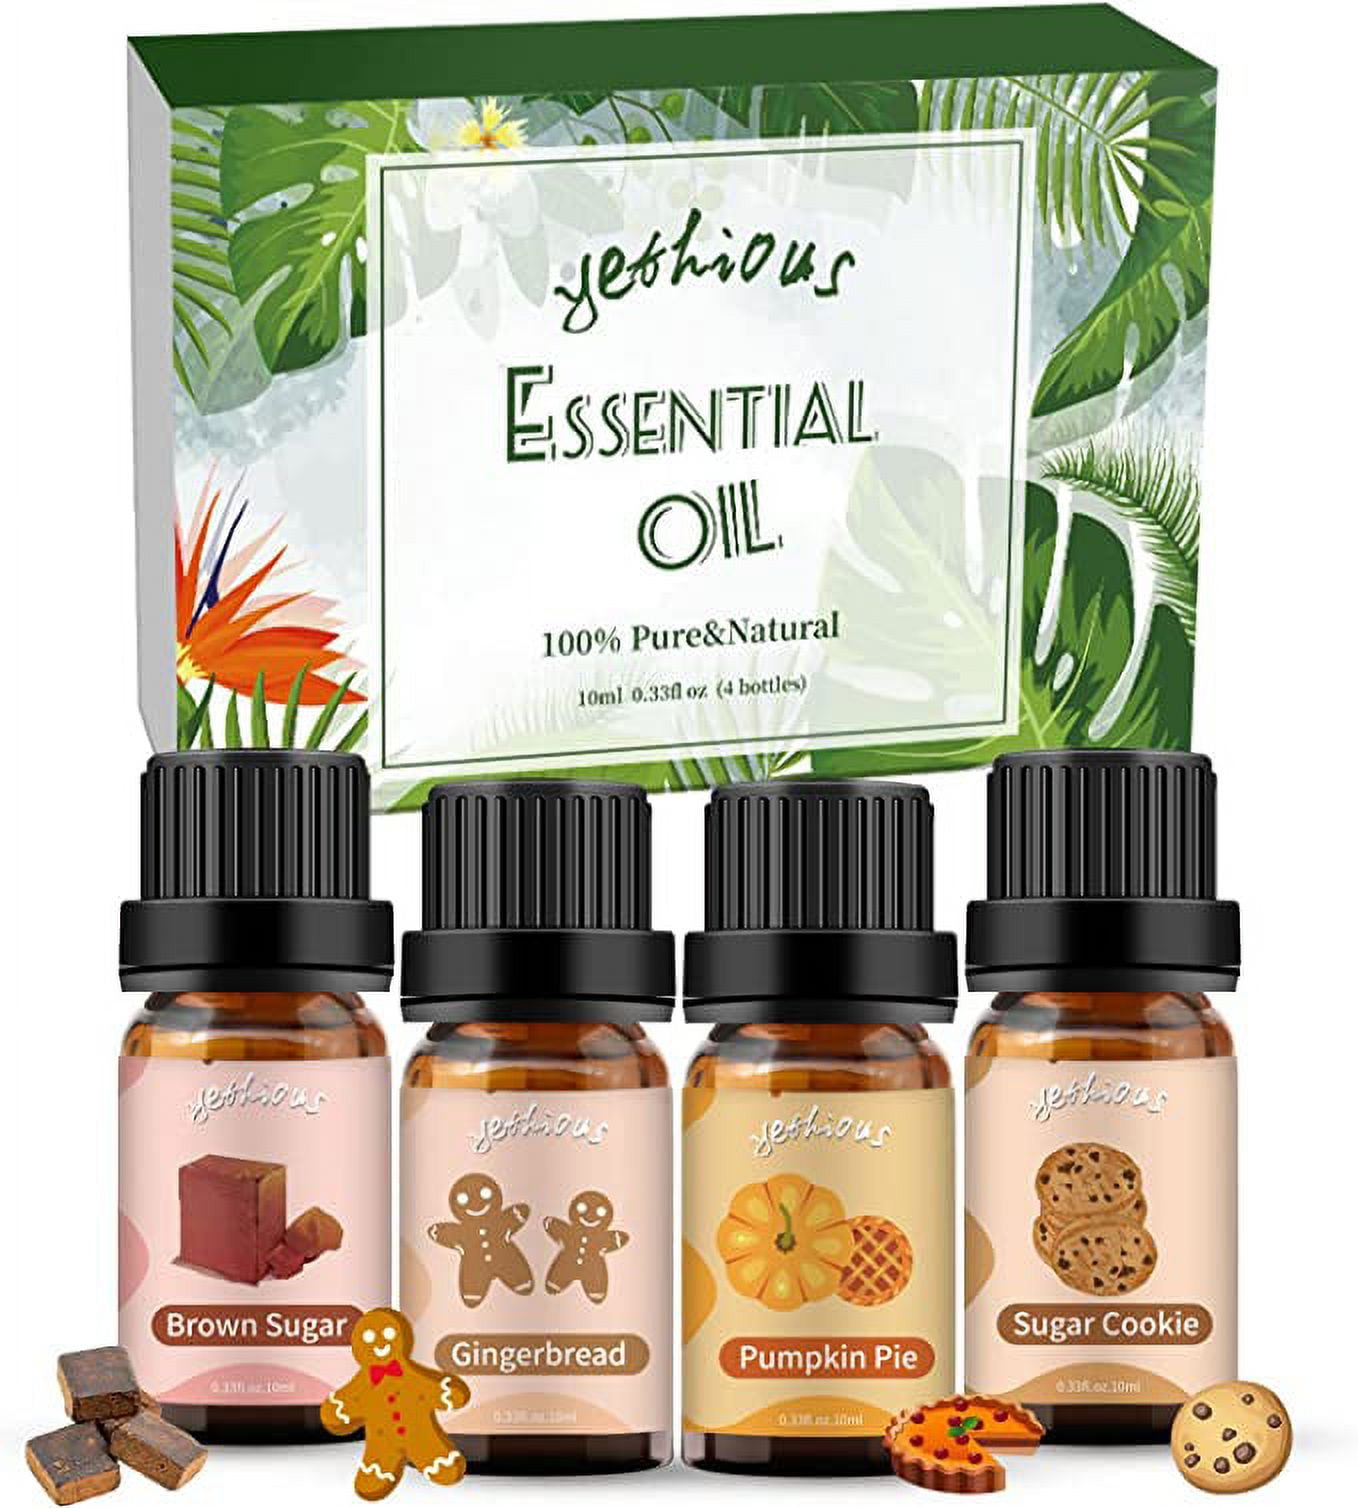 Sedbuwza Peony Oil Lotus Essential Oil Set, 100% Pure Organic Aromatherapy  Oils Gift Set for Diffuser, Massage, Soap, Candle Making - 2 x